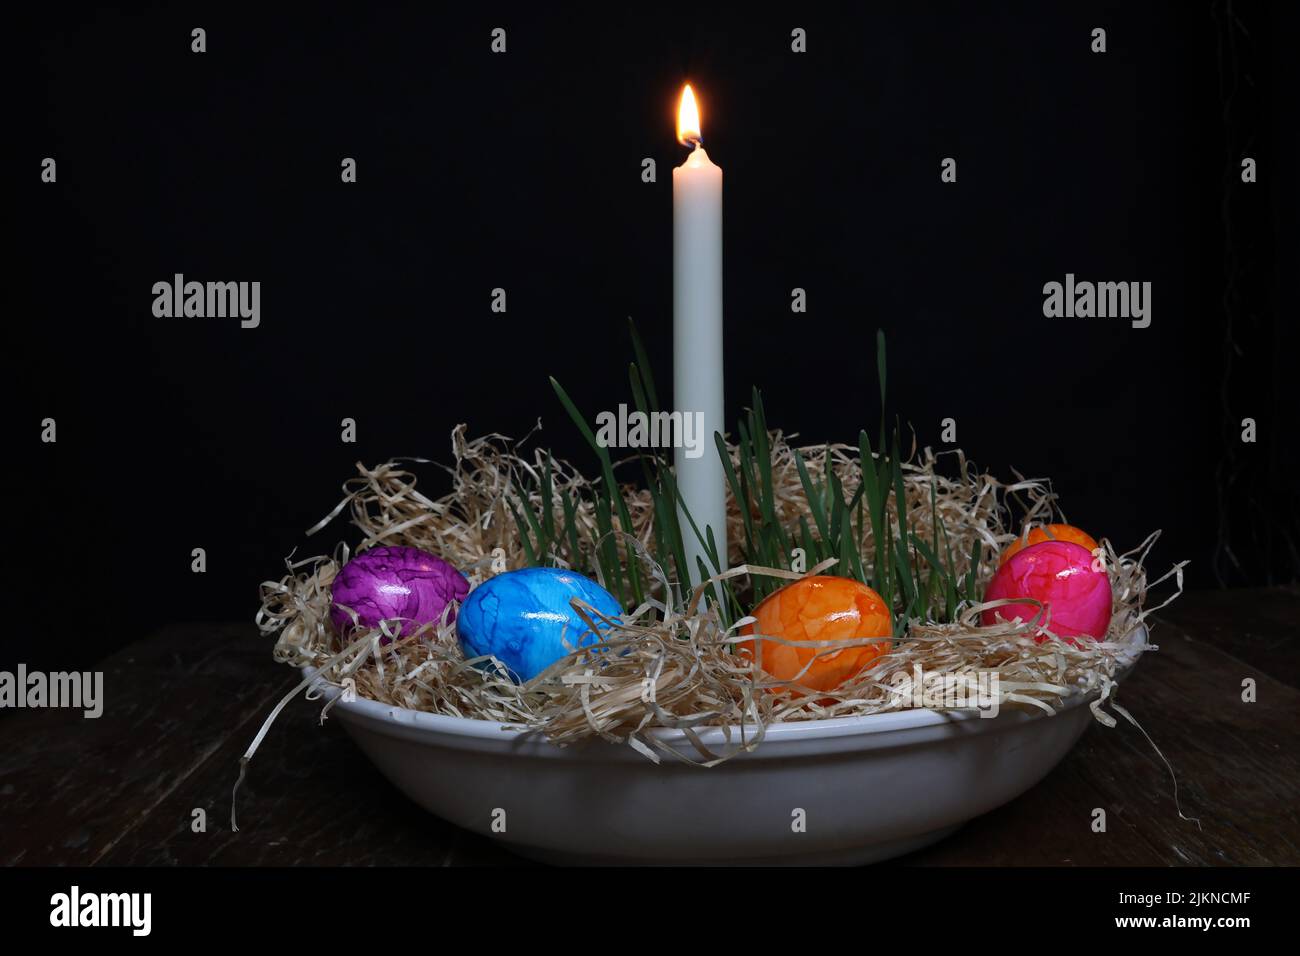 Easter traditions, Compositions with painted Easter eggs. Stock Photo